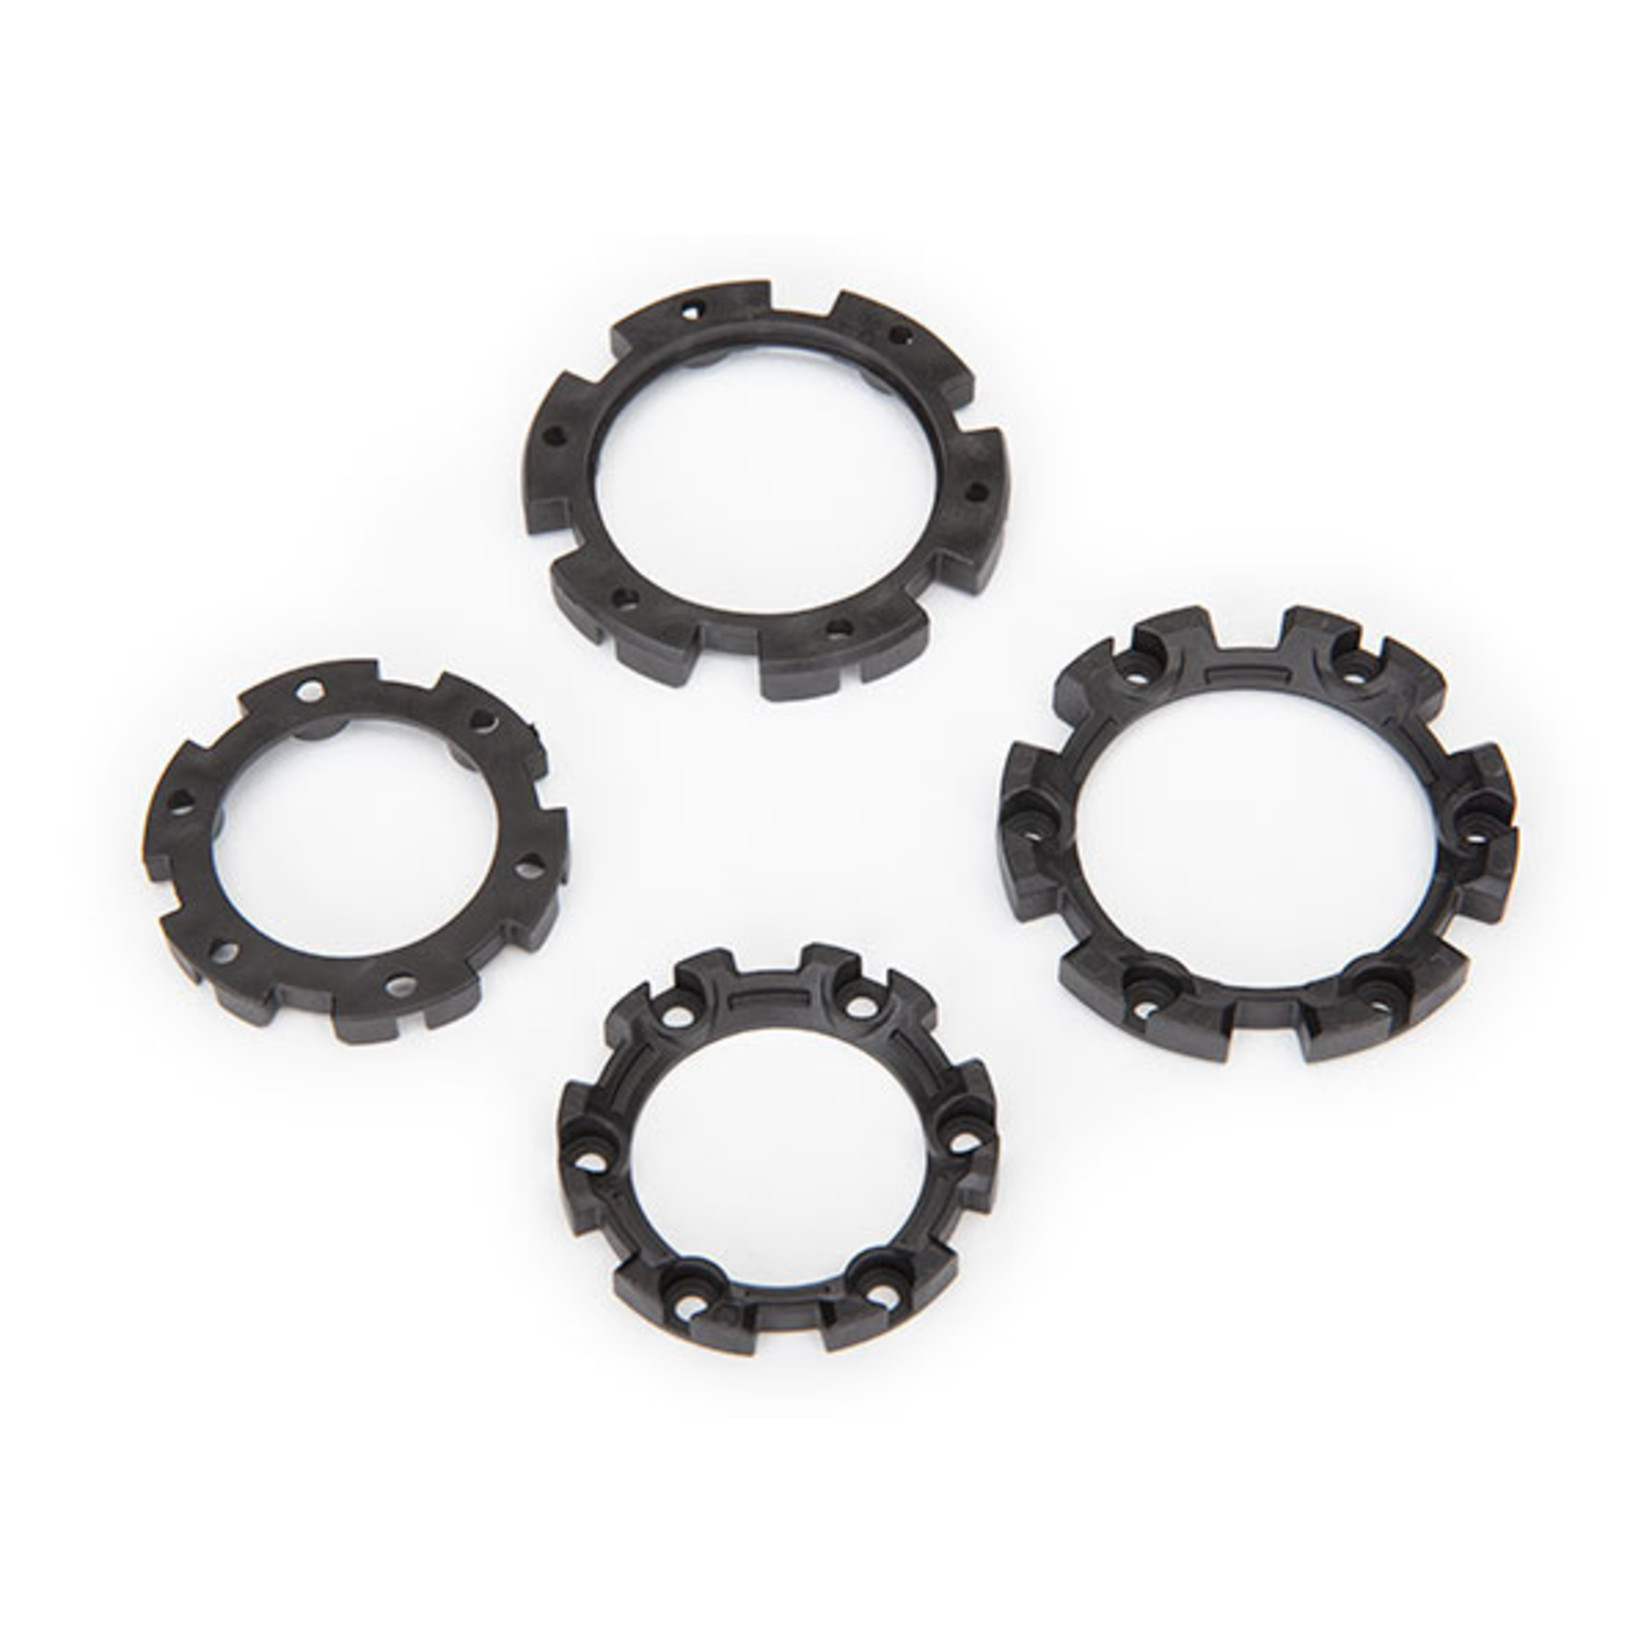 Traxxas 8889 - Bearing retainers, inner (2), outer (2)